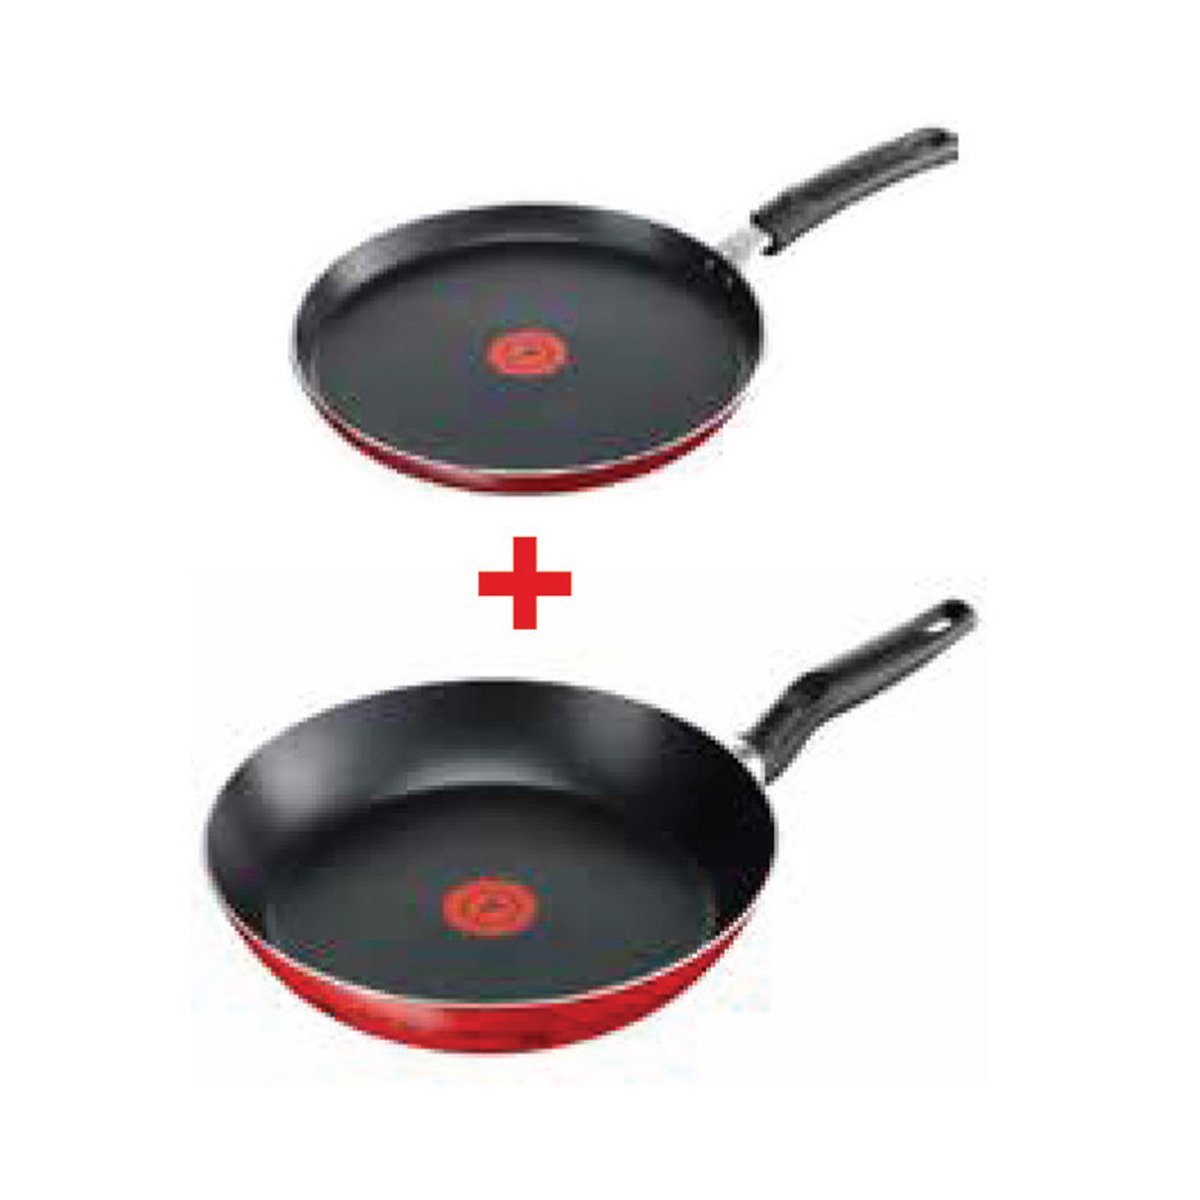 Tefal Simplicity Pan with Essential CDF Fry Pan, 25+24 cm